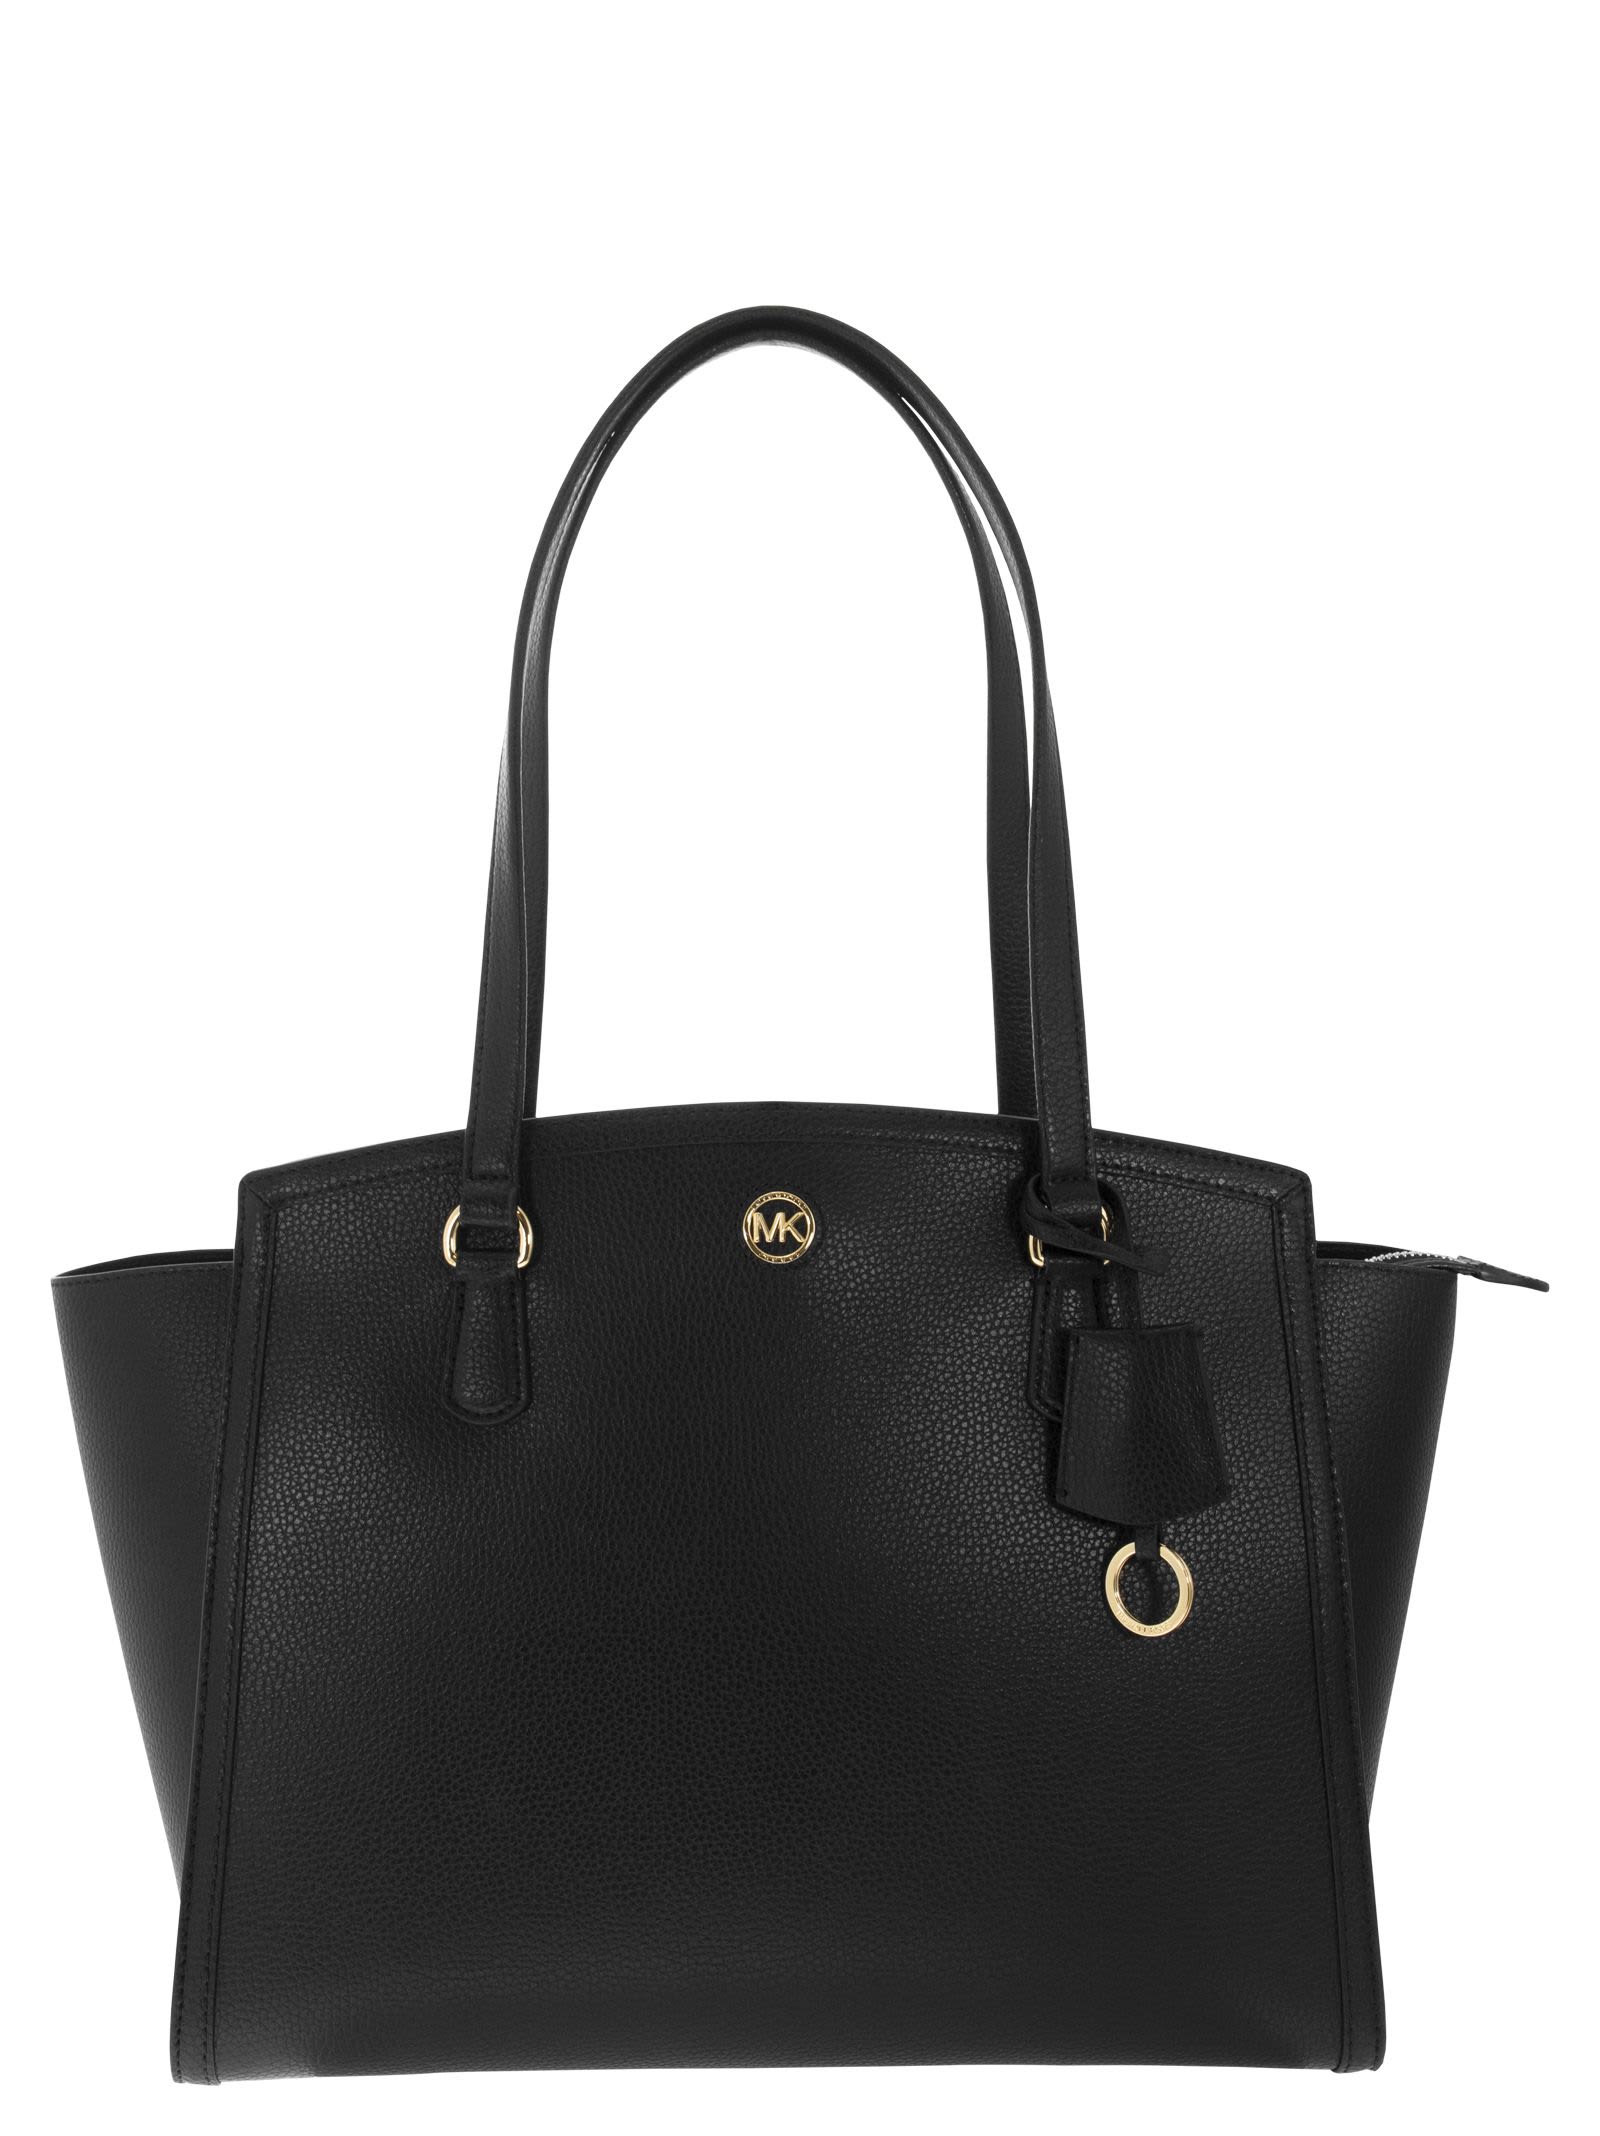 MICHAEL KORS CHANTAL - LARGE GRAINED LEATHER TOTE BAG